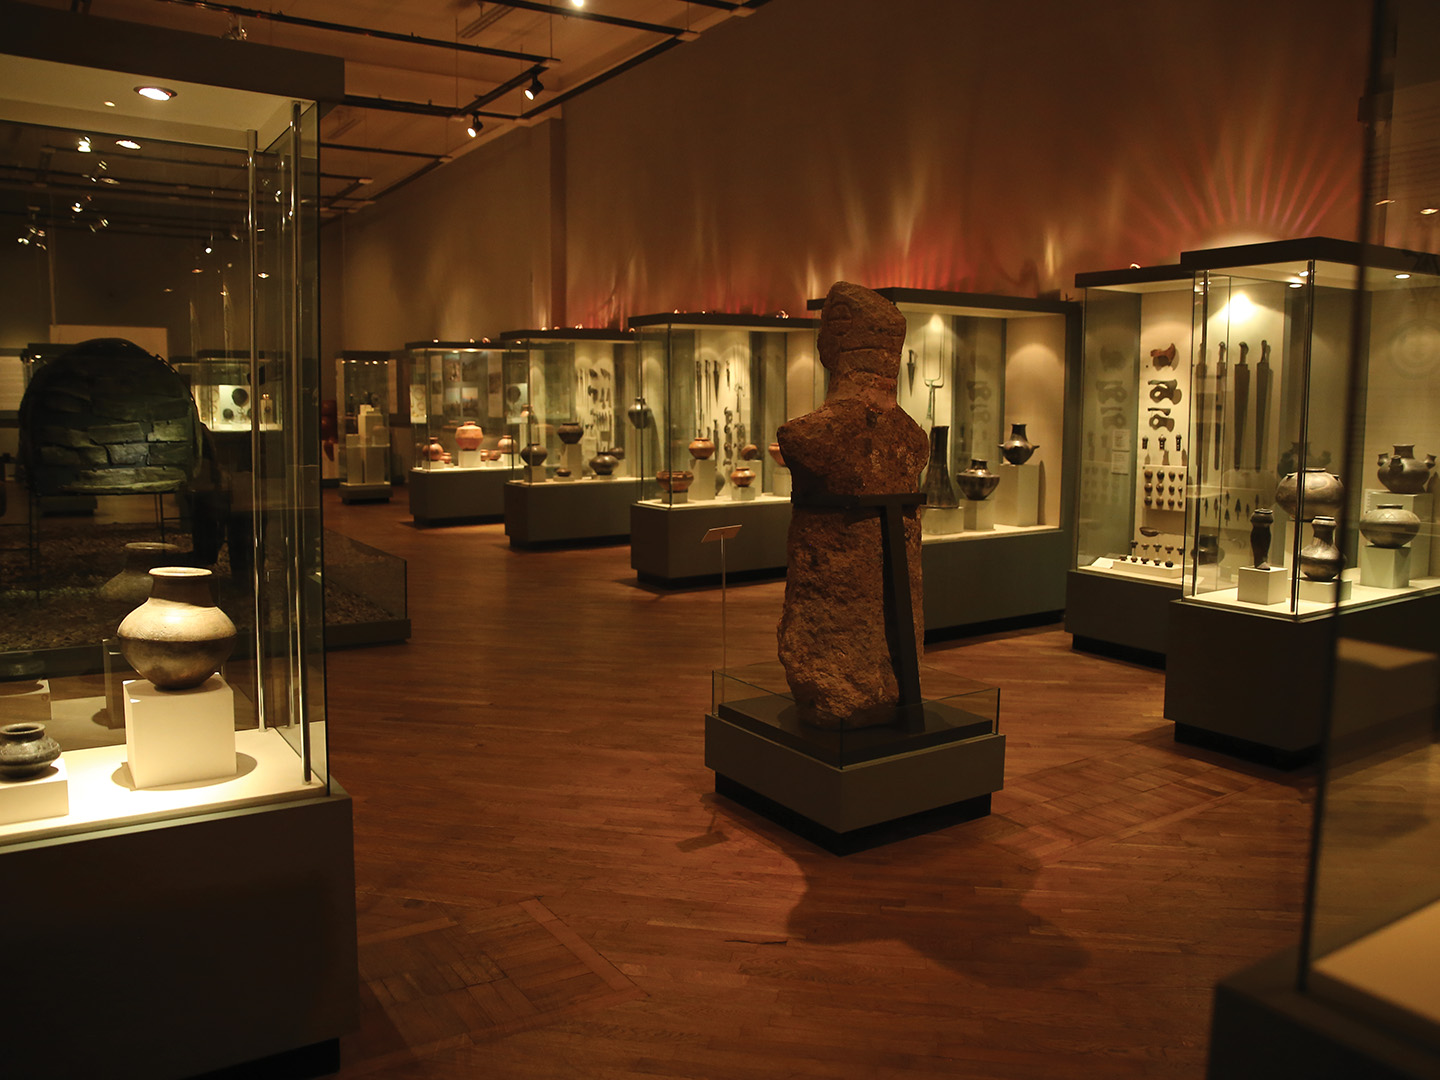 A glimpse of the impressive collection inside the History Museum of Armenia in Yerevan.